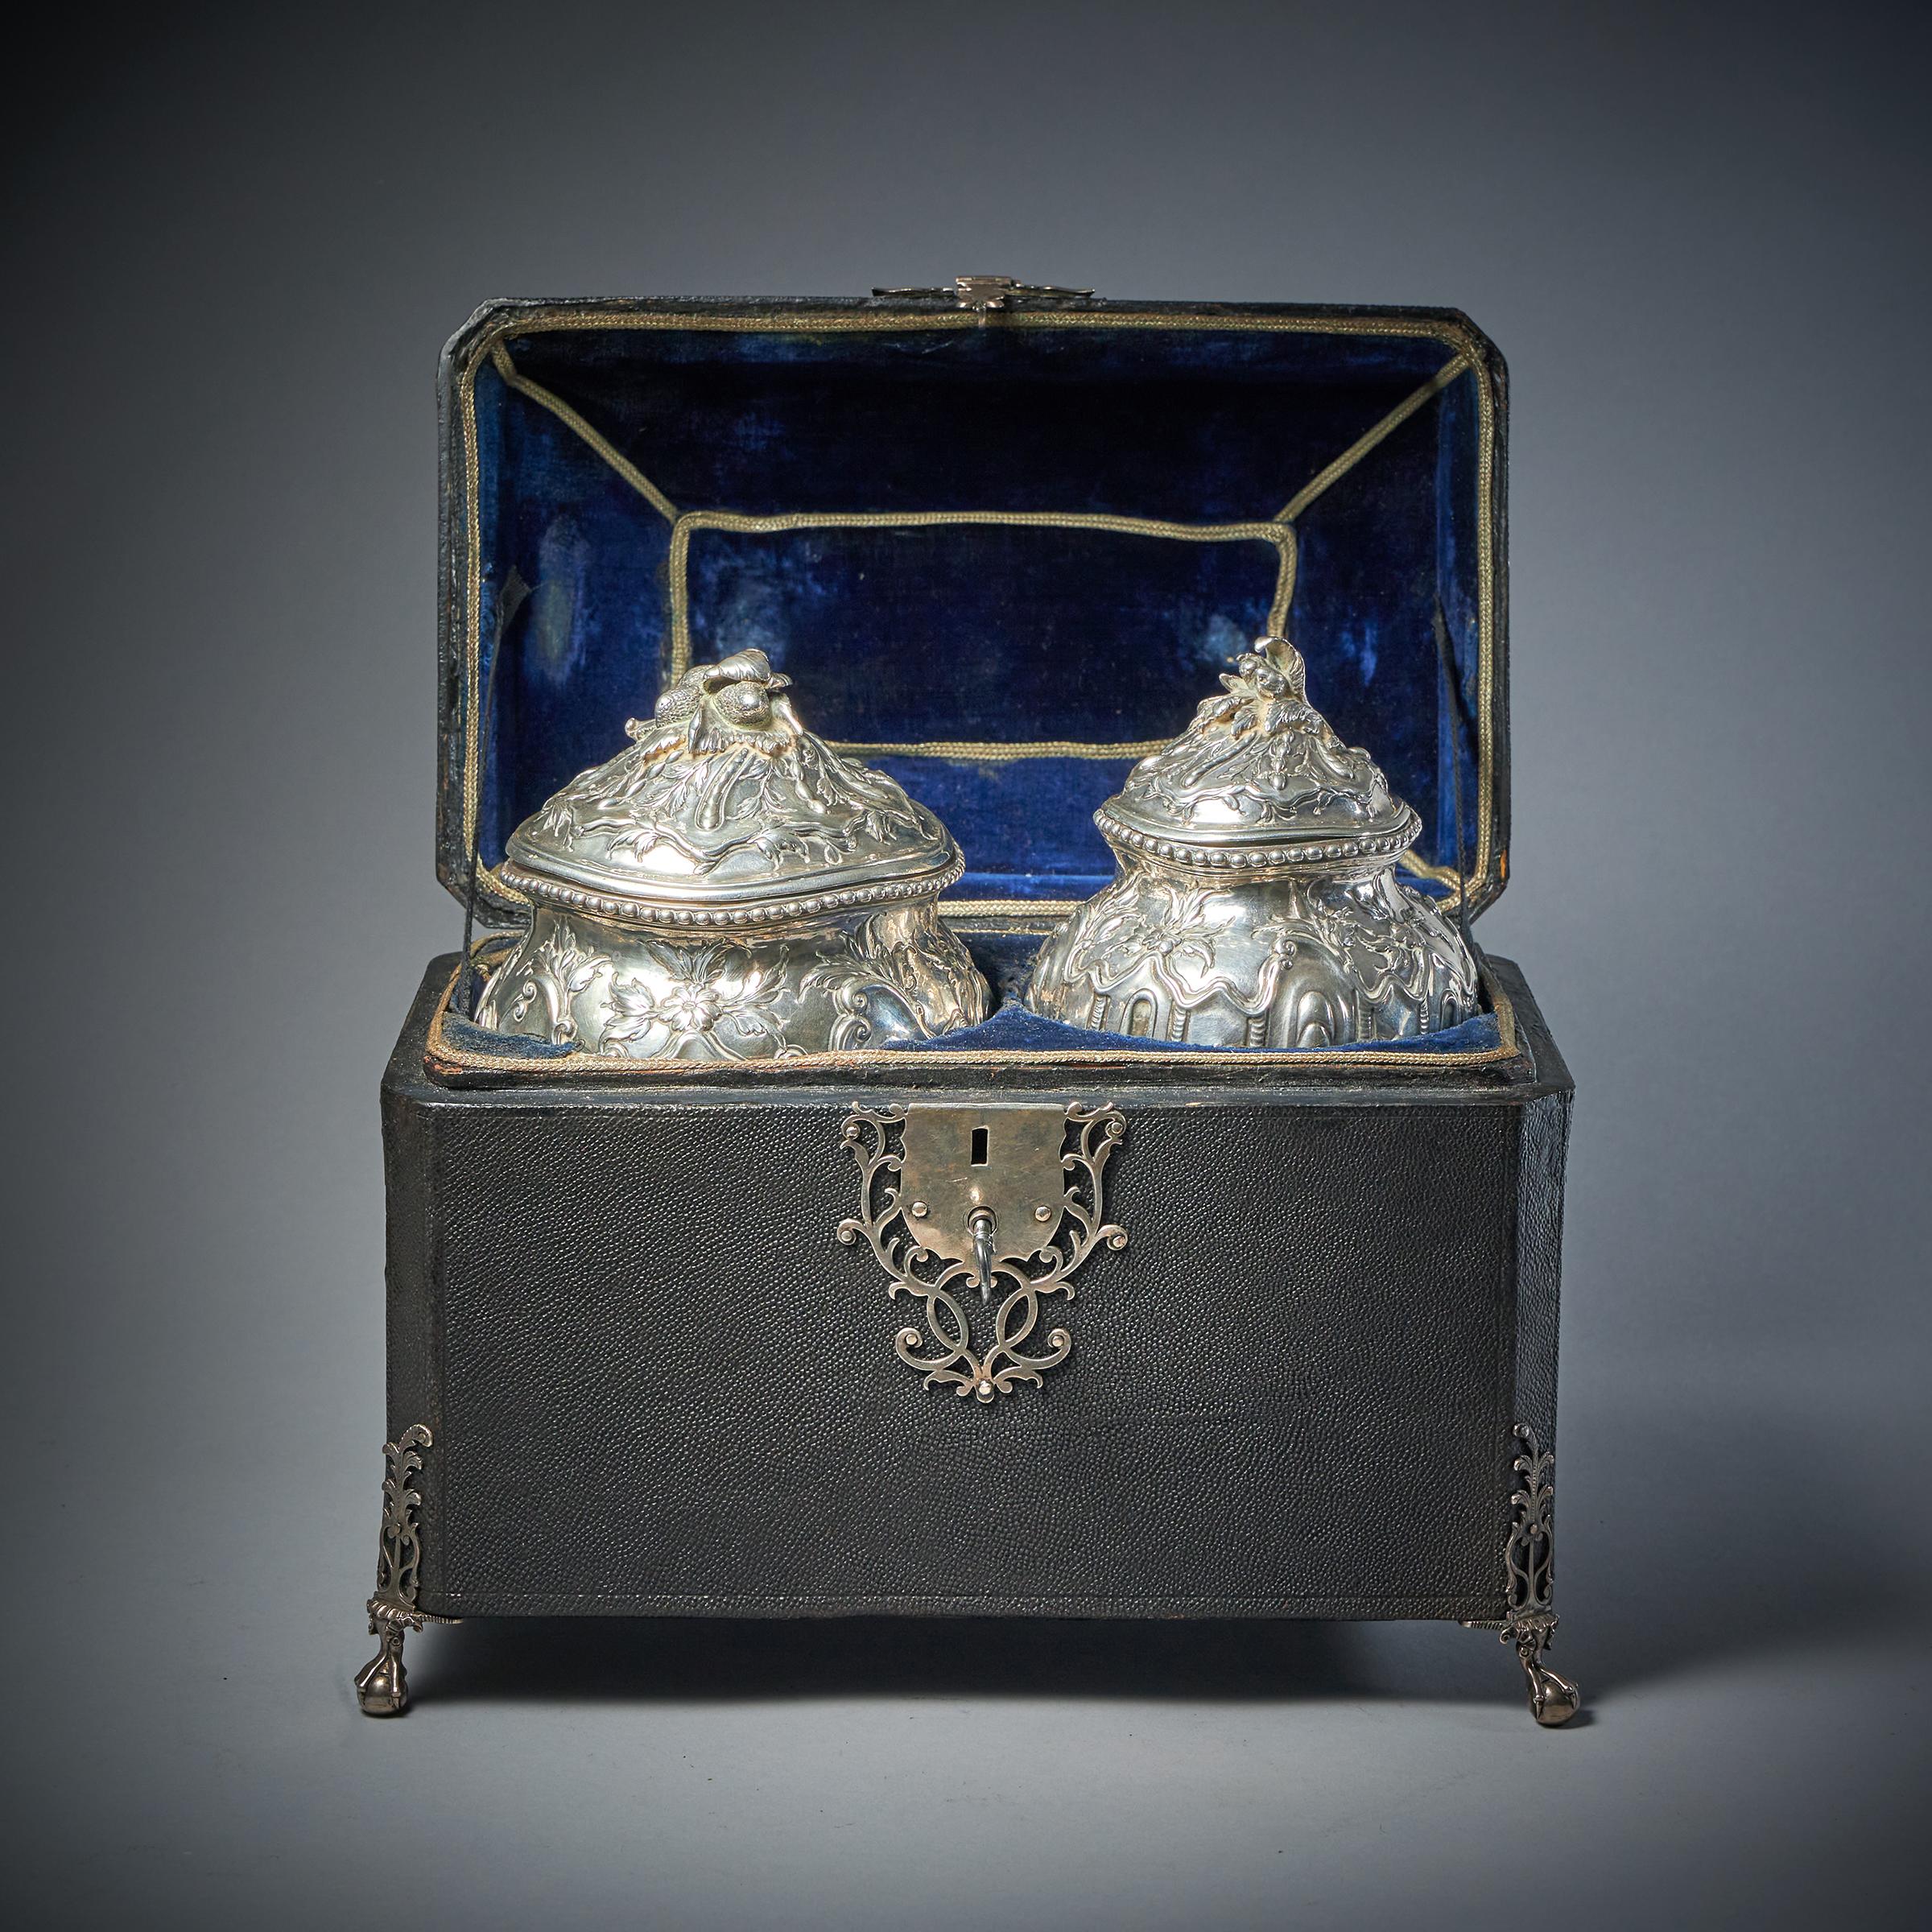 Rare Silver Mounted George II Shagreen Tea Caddy with Silver Rocco Canistors In Good Condition For Sale In Oxfordshire, United Kingdom